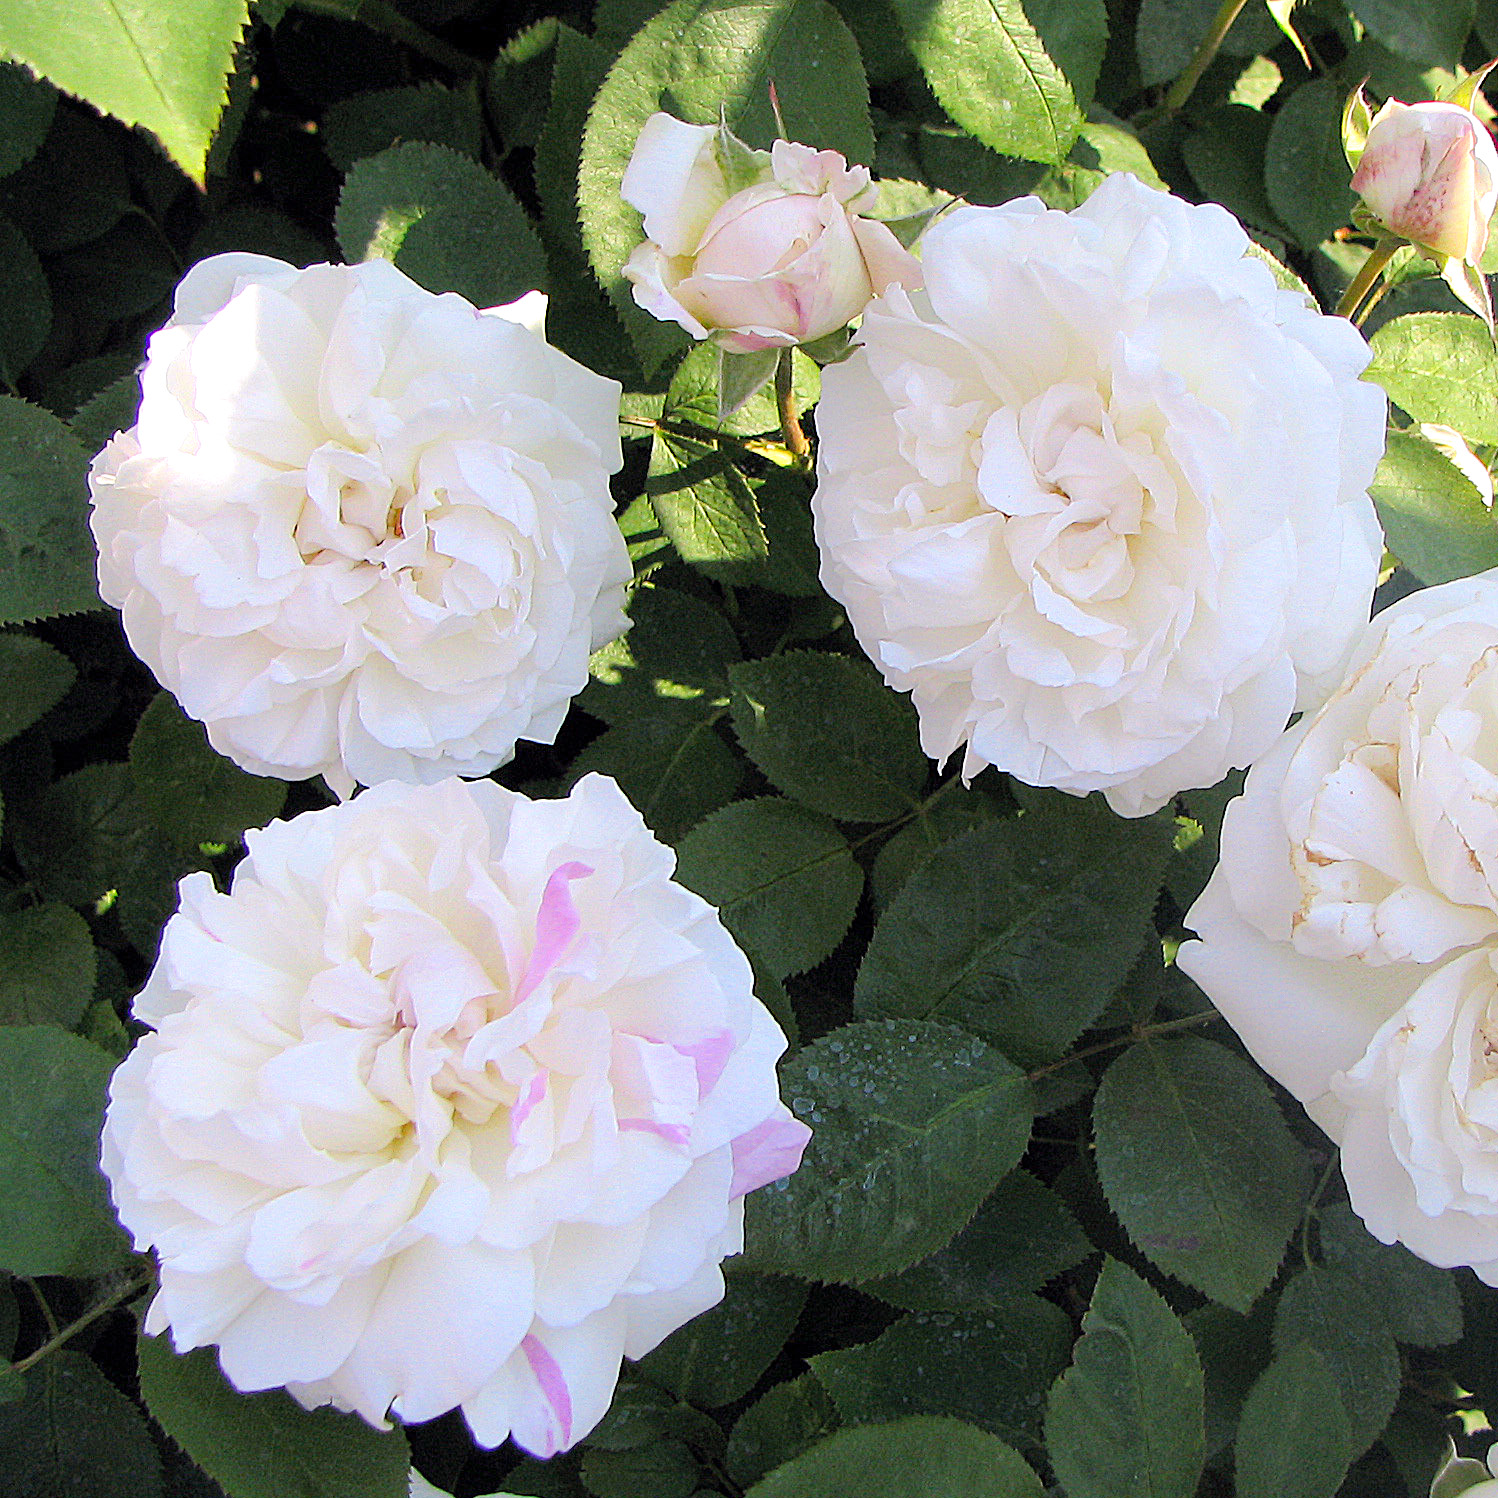 File:Winchester cathedral English rose.jpg - Wikimedia Commons